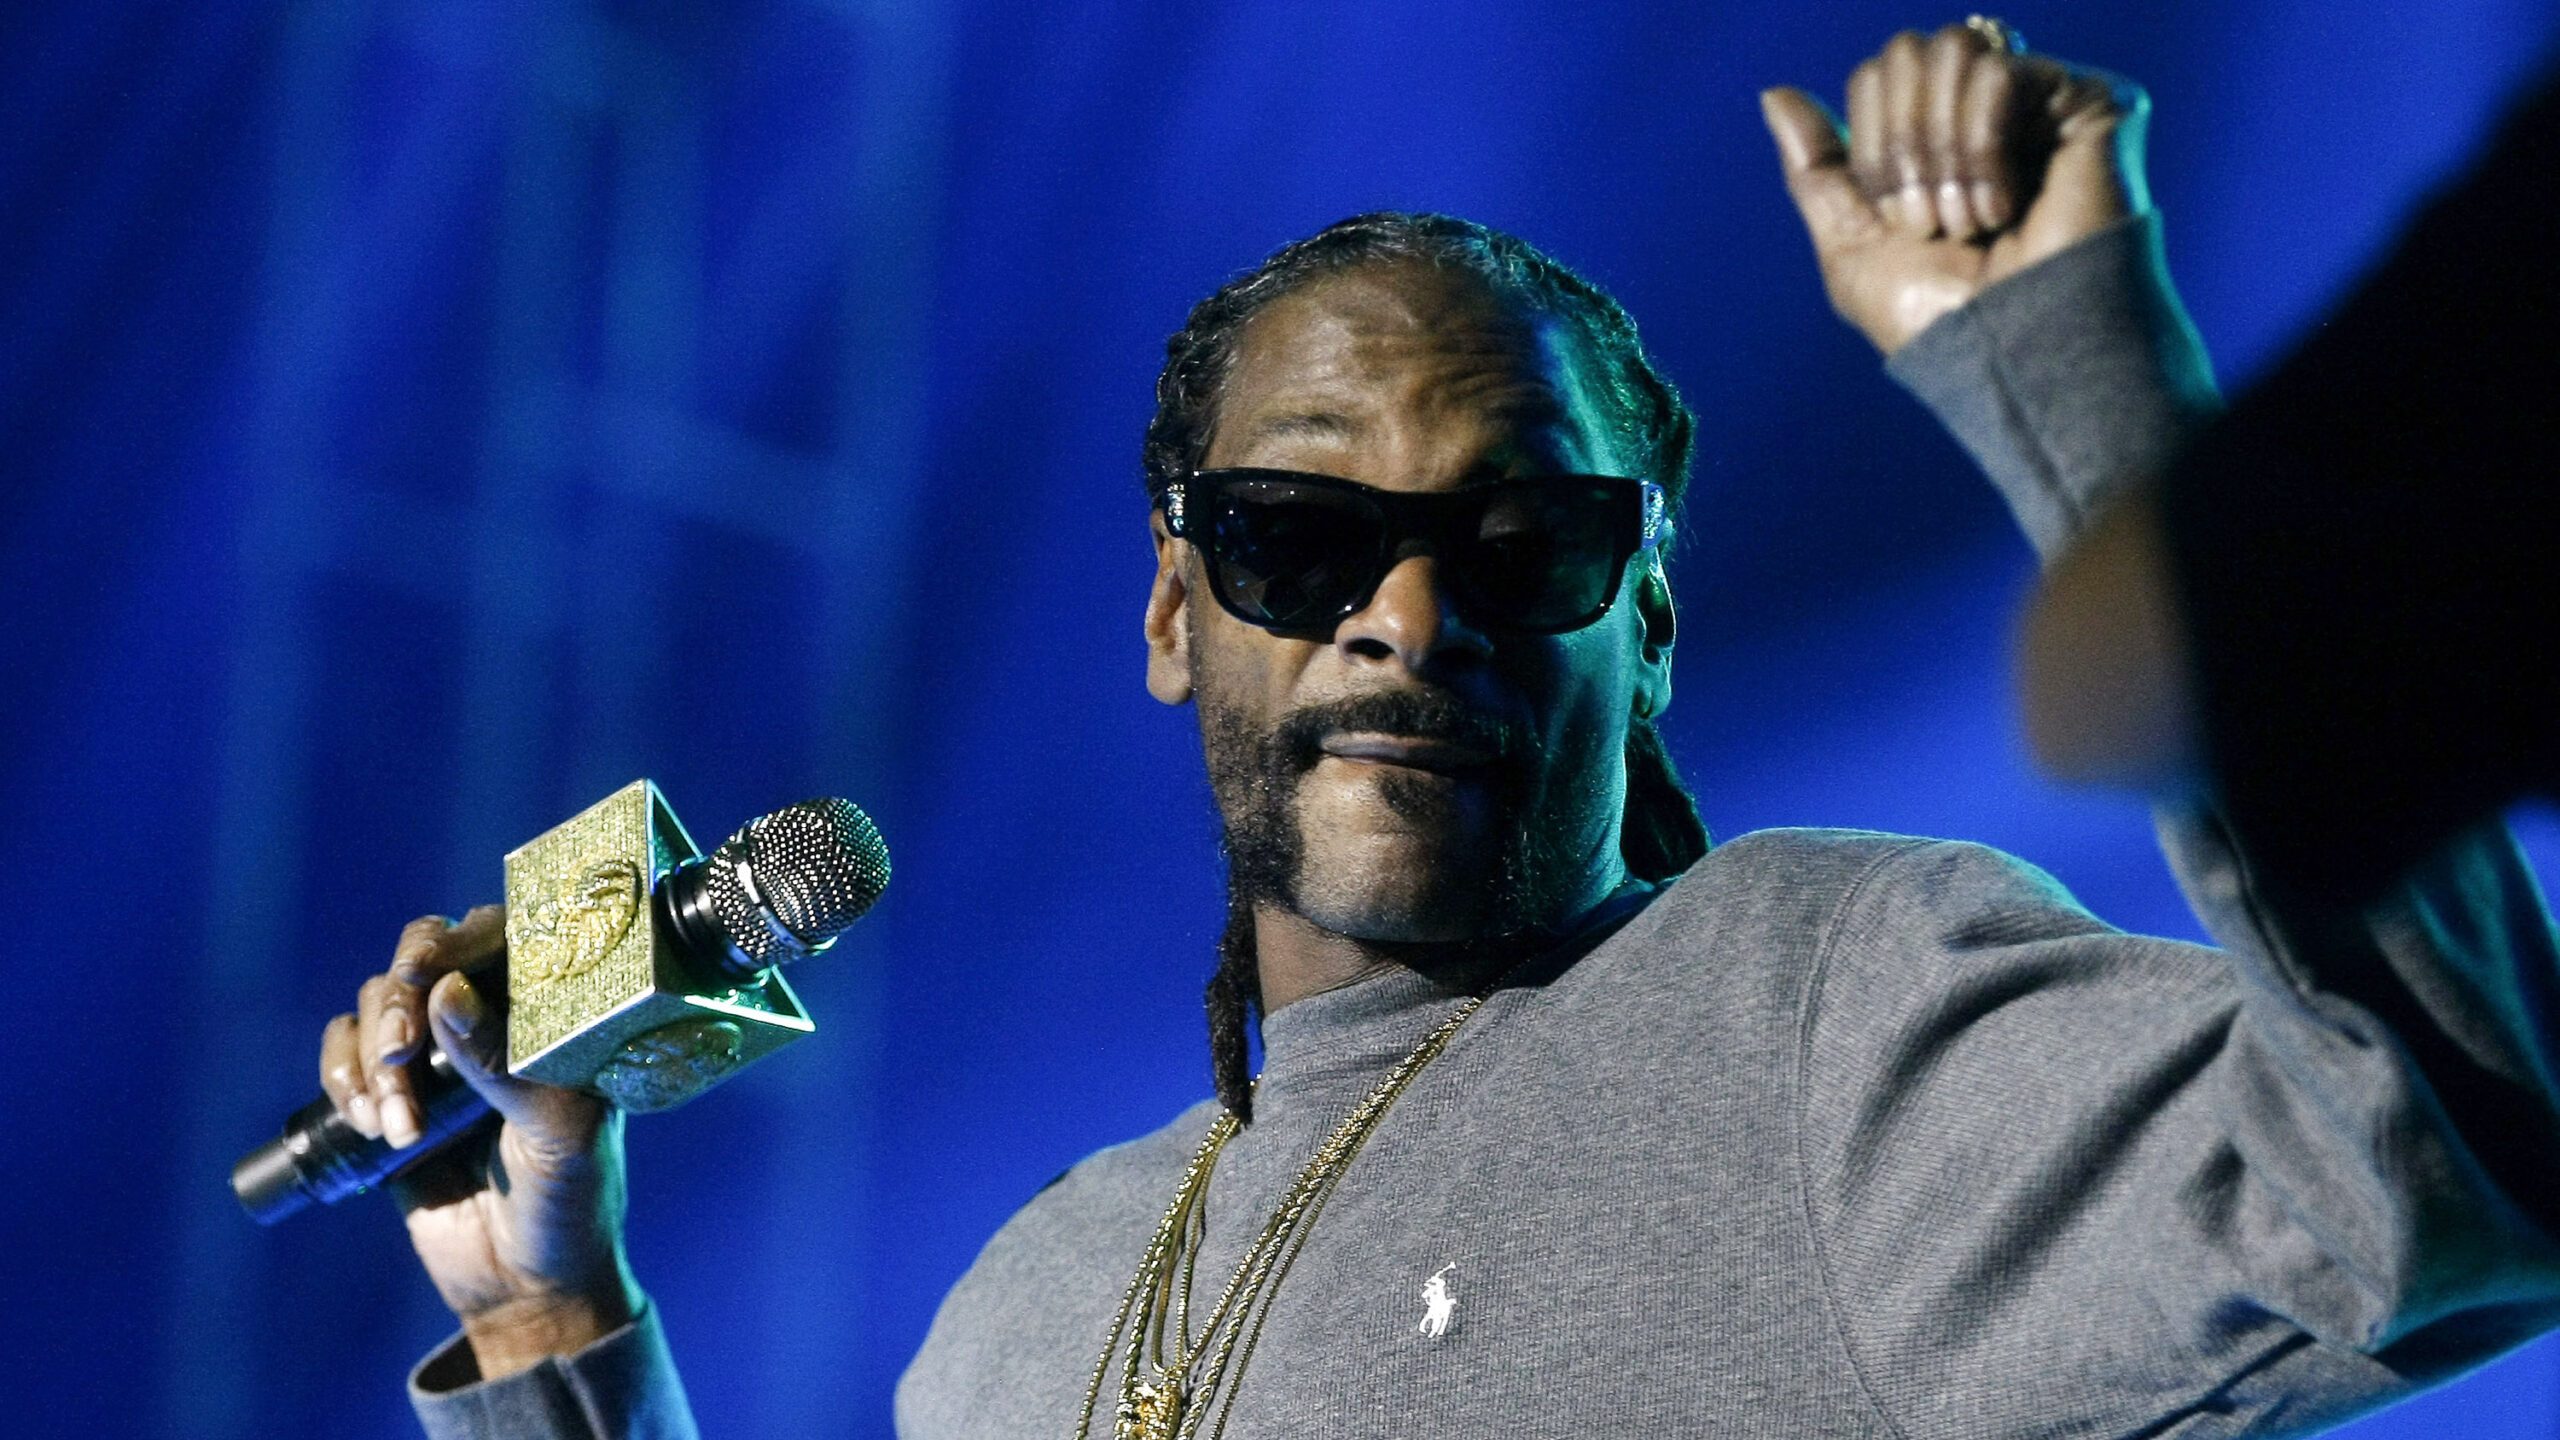 Snoop Dogg to play at Hillary Clinton convention party